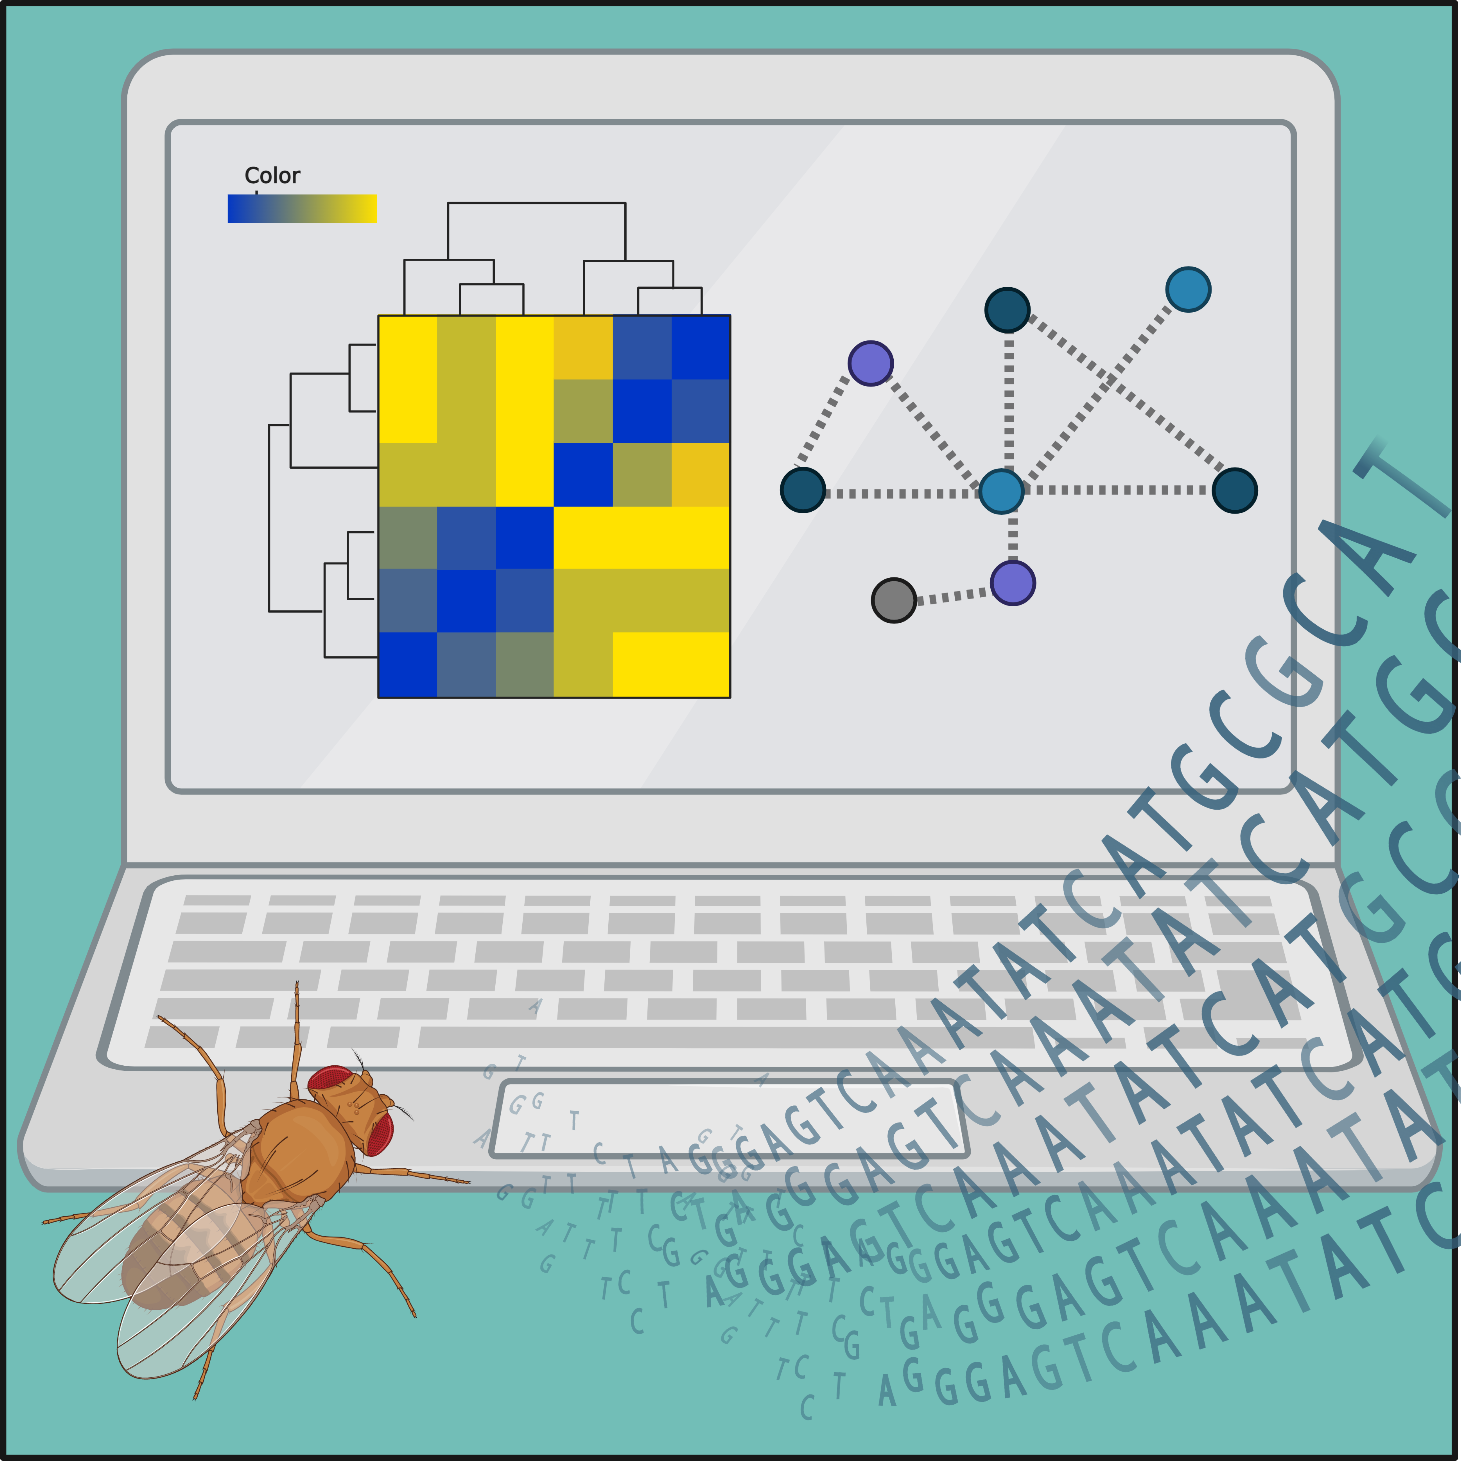 Illustration of computer with heatmaps and fly